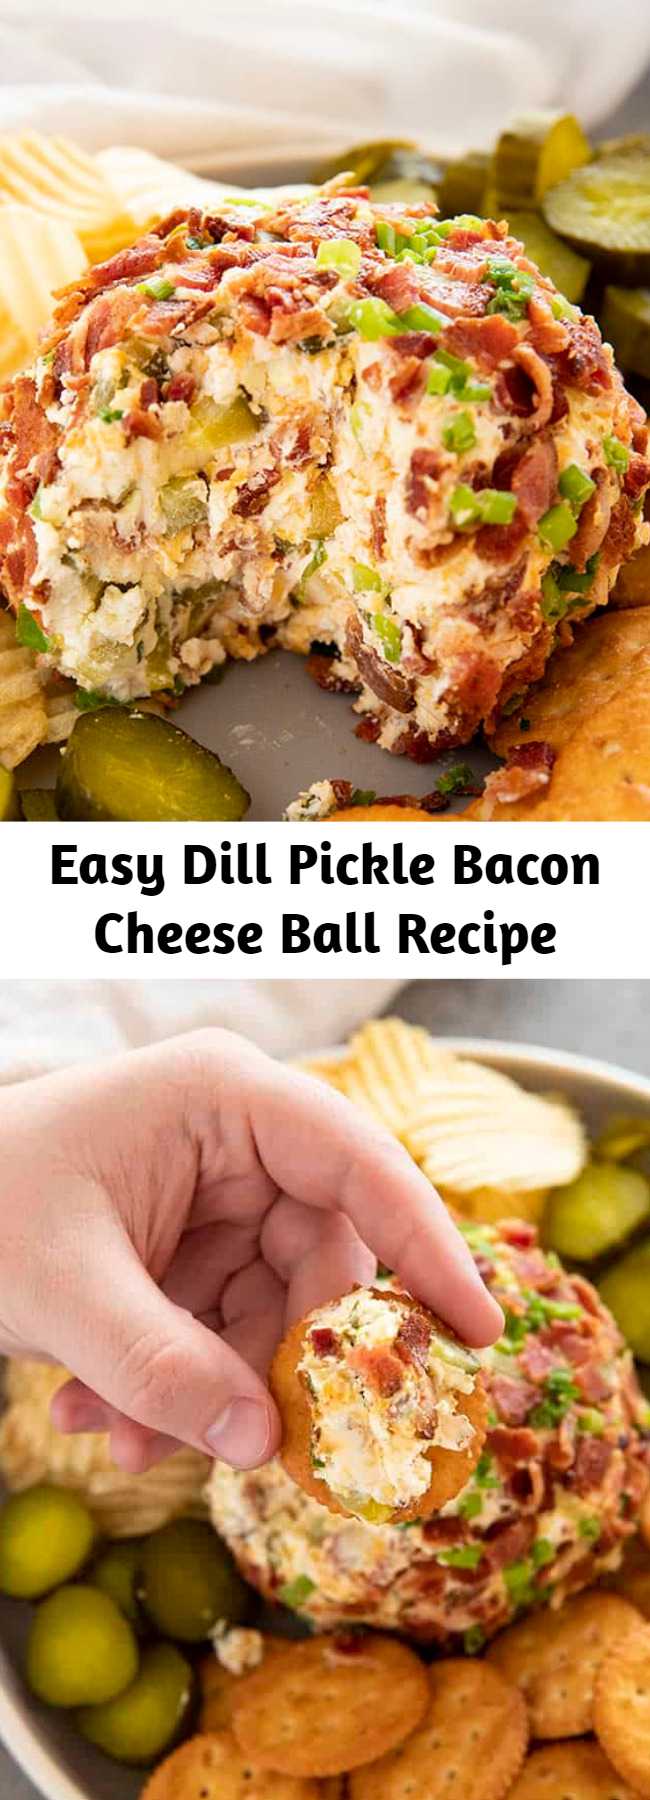 Easy Dill Pickle Bacon Cheese Ball Recipe - Dill Pickle Bacon Cheese Ball is such a fun and easy cheese ball recipe made with cream cheese, cheddar, pickles, and bacon!  The perfect appetizer for any party! #thesaltymarshmallow #tailgating #footballfood #pickles